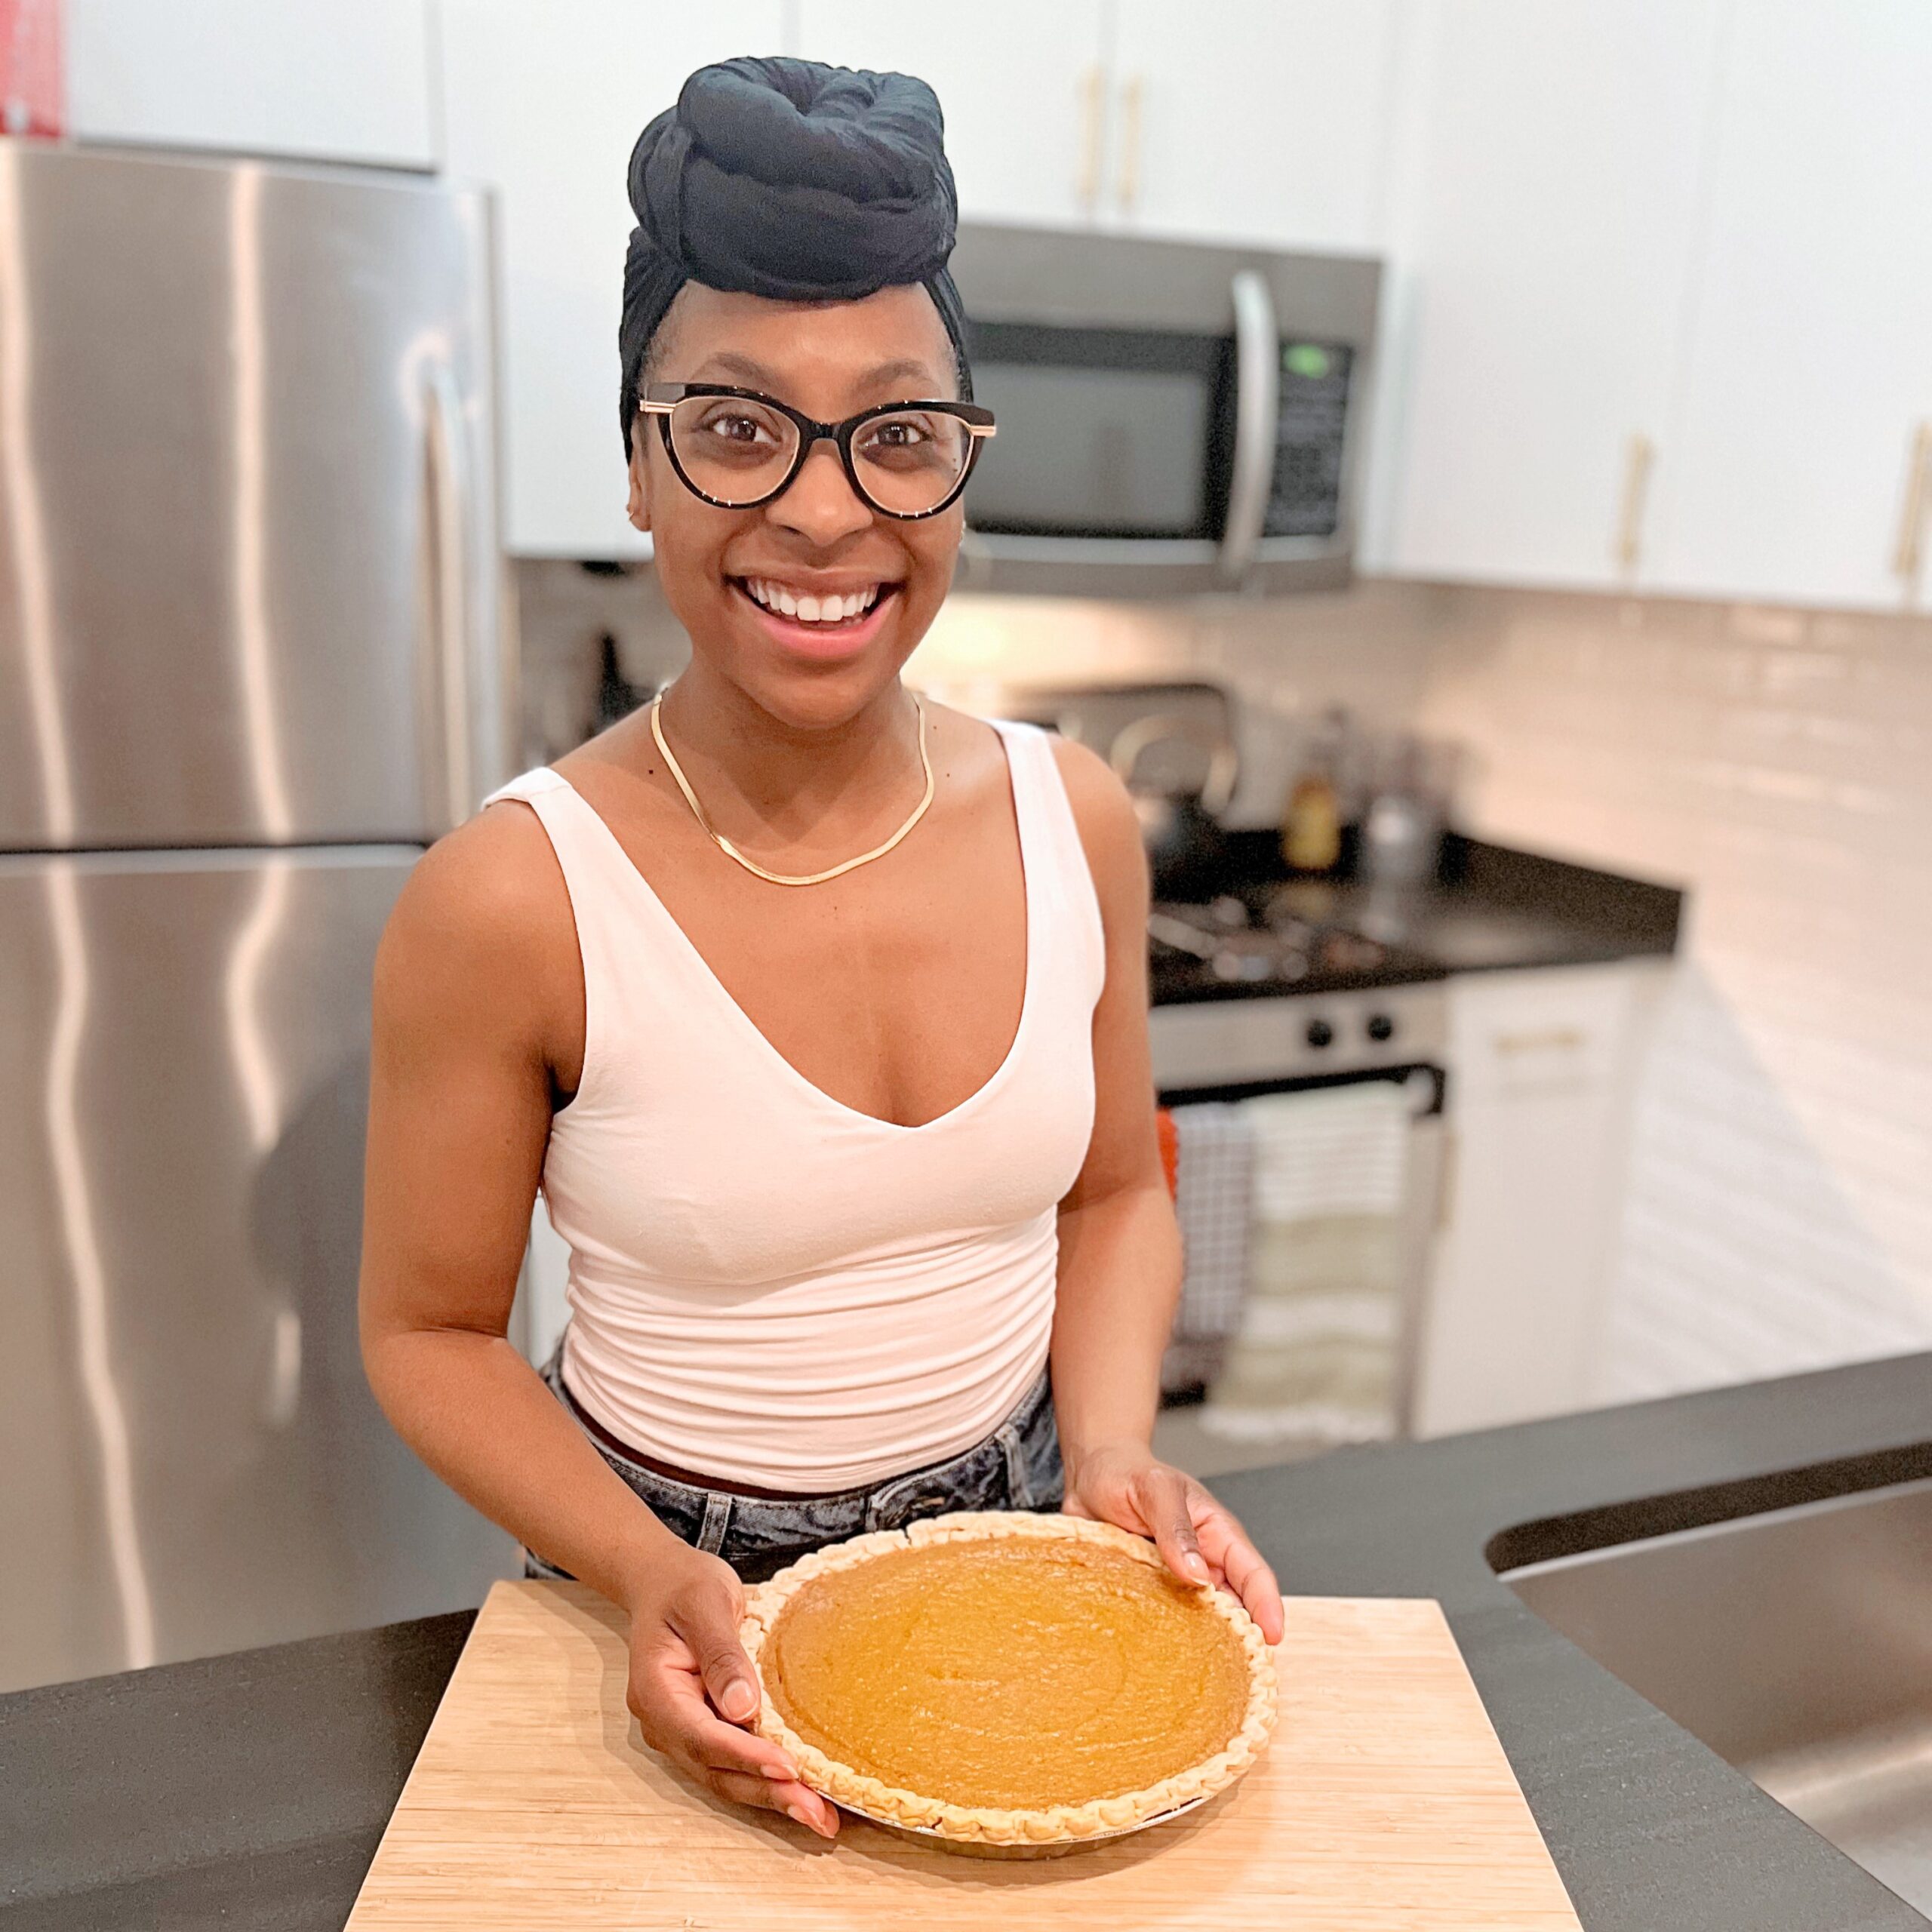 a woman wearing a pink tank top and glasses holding a pie in a kitchen